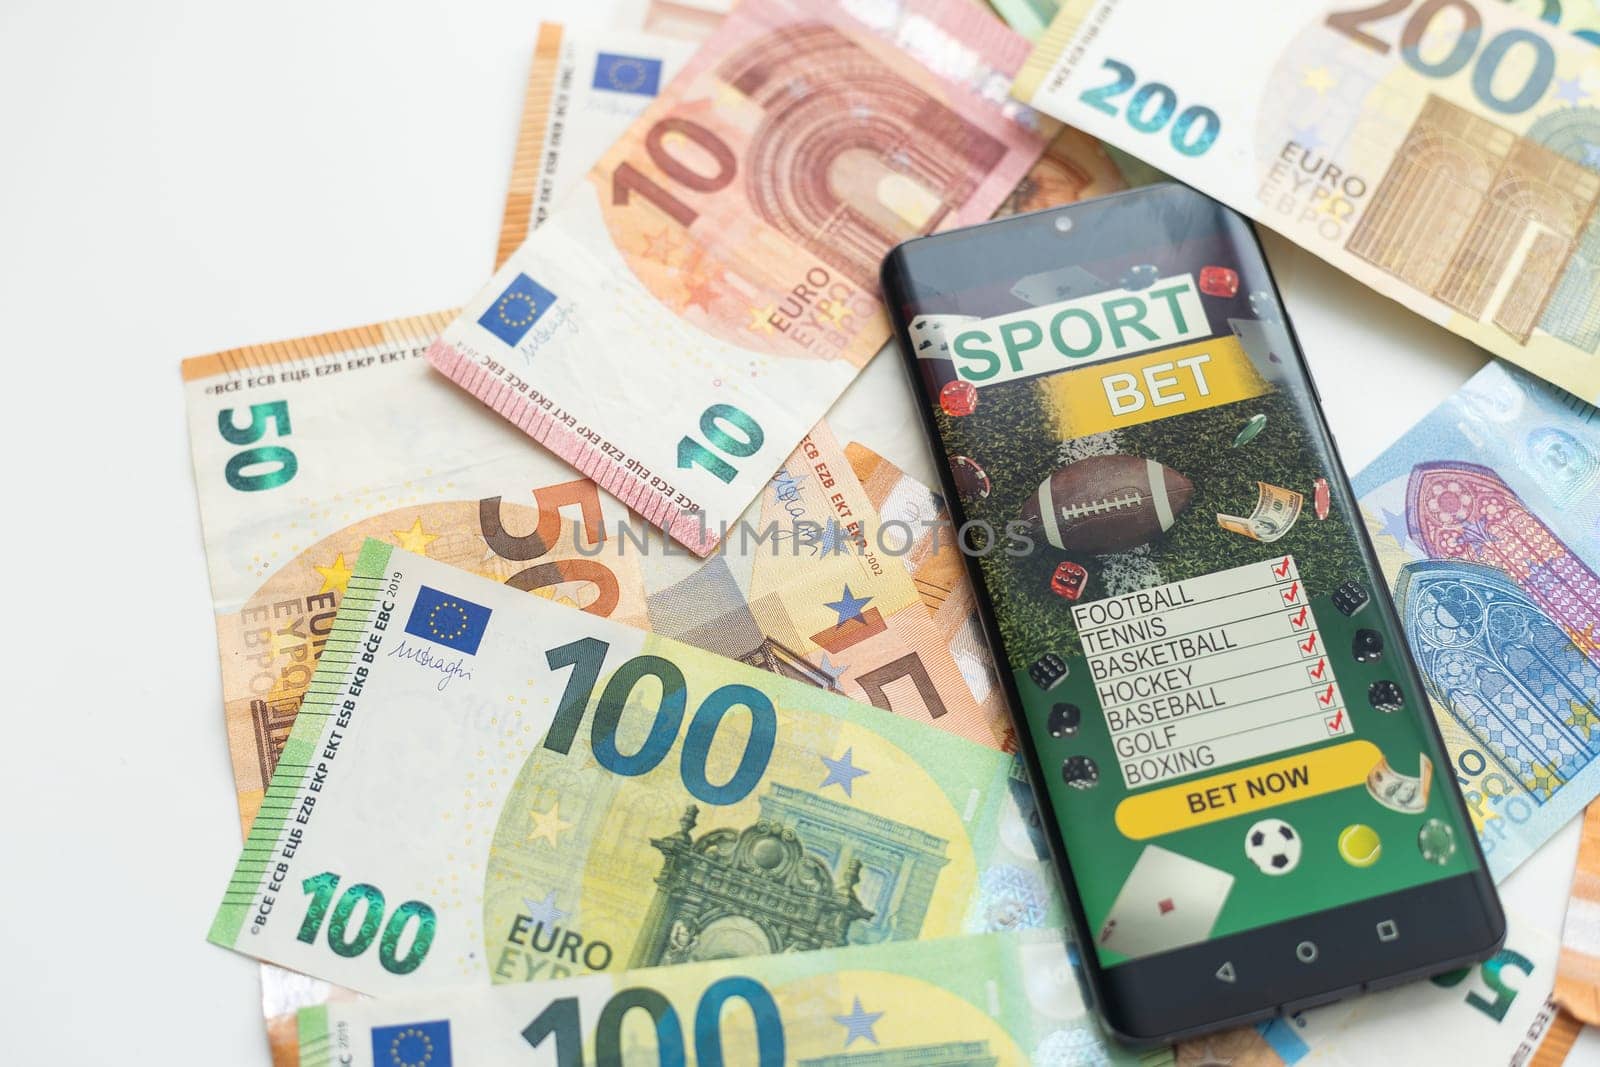 betting on sports, smart phone with working online betting mobile application by Andelov13